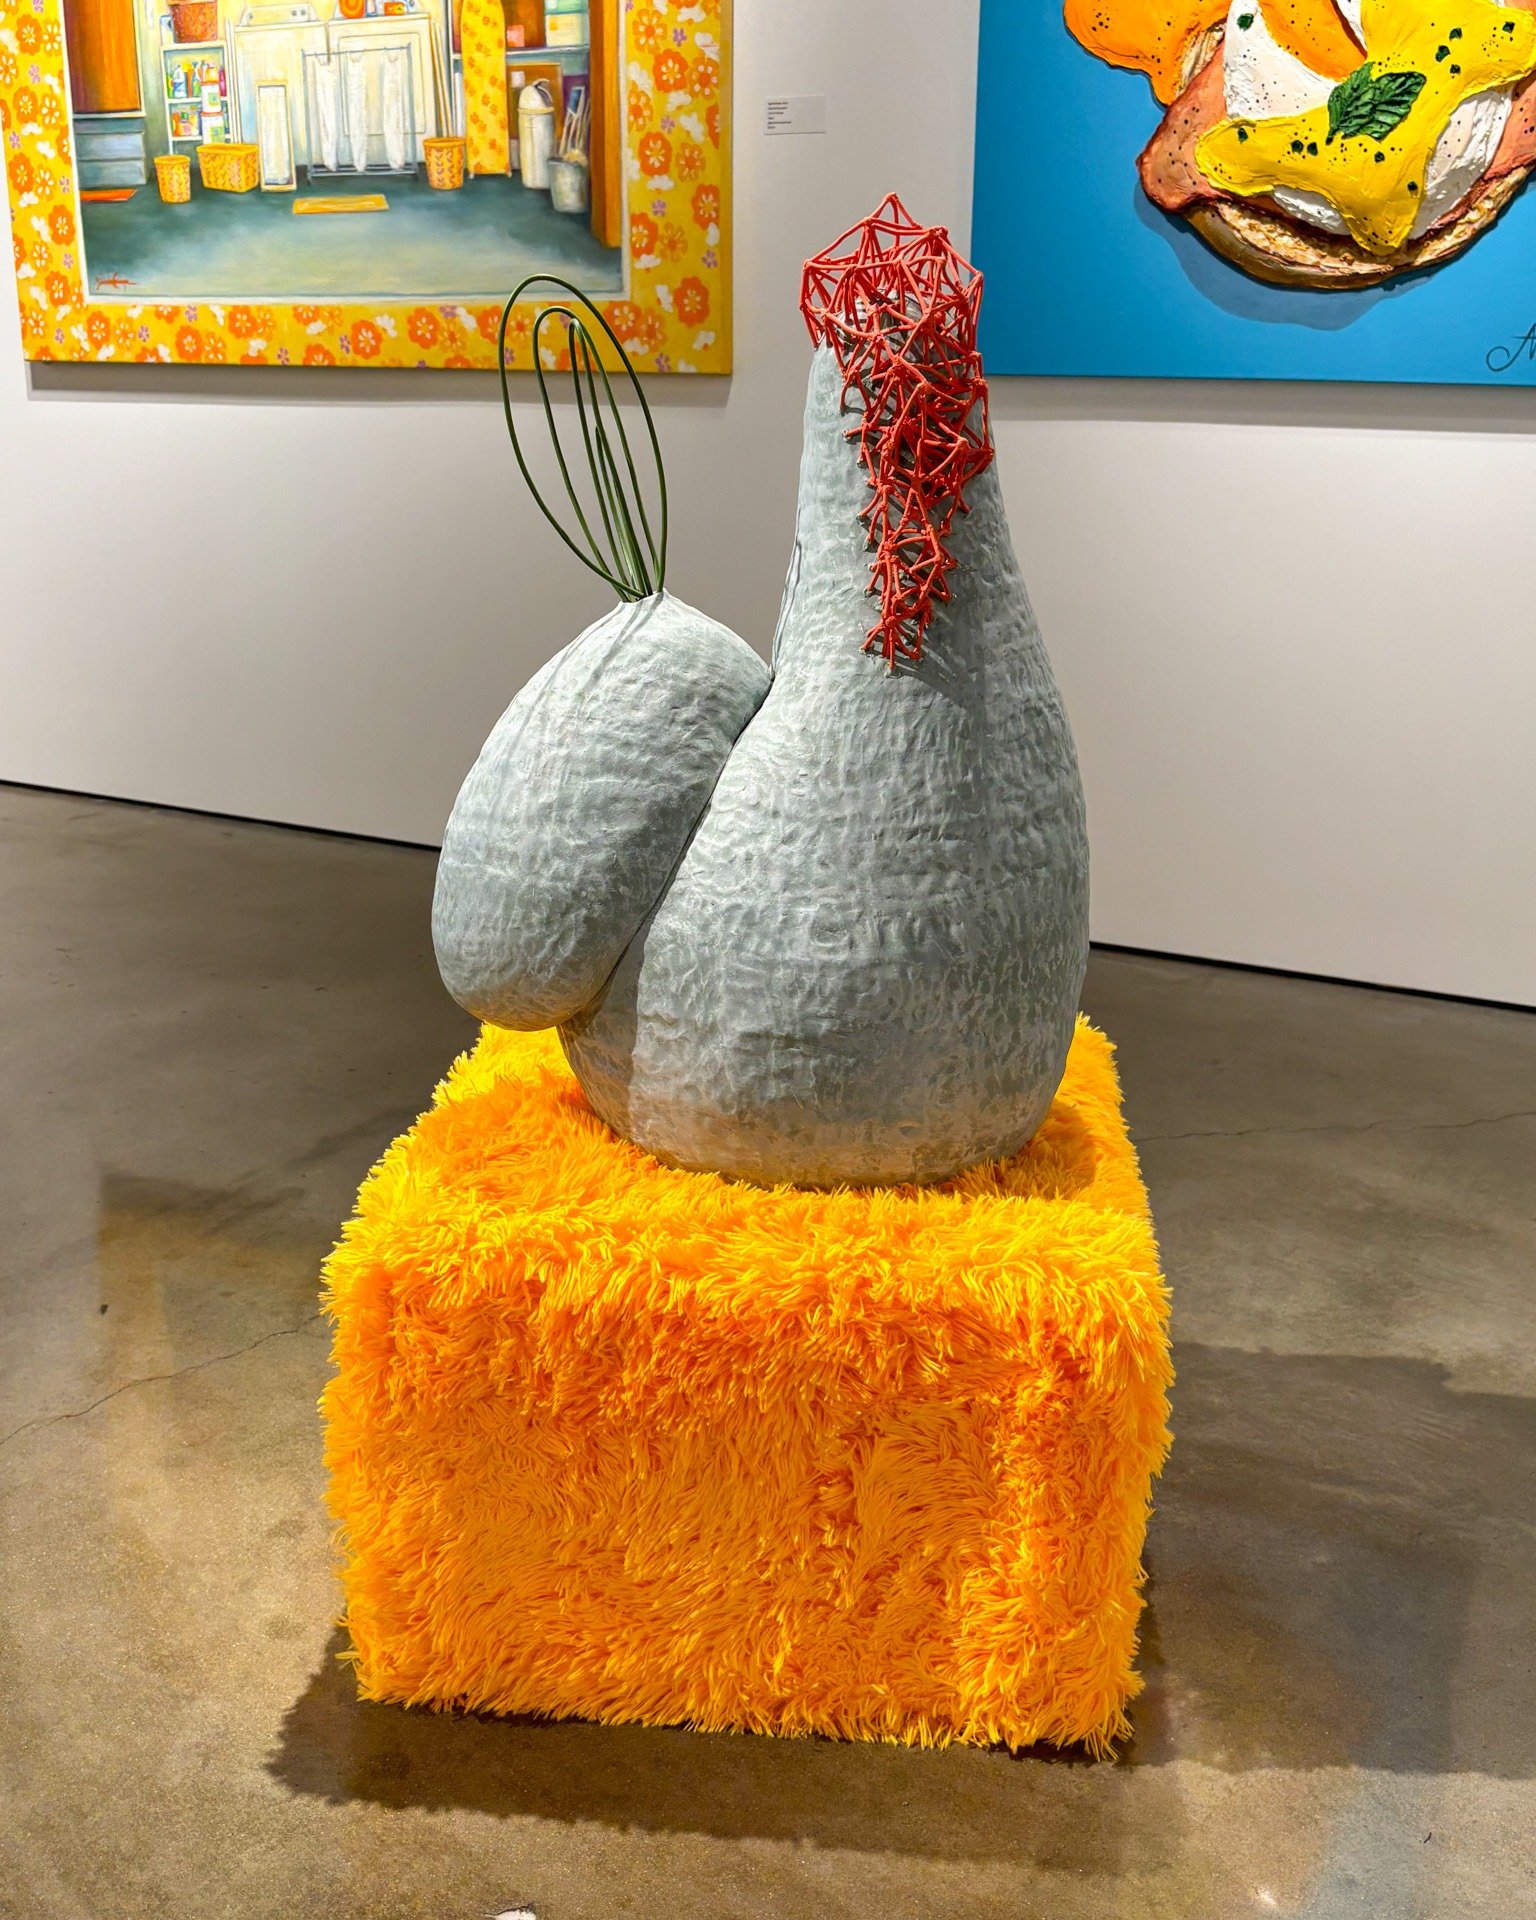 Let's take a look at some rad non-representational and abstract work from MICA 👀

🐔 &quot;Homebody 2,&quot; 2021 by Jasmine Peck
🪡 &quot;The Longest Double Date,&quot; 2023 by Lex Harvey
🌈 &quot;fragola,&quot; 2022 by Kadie DiCarlo
🌊 &quot;From 